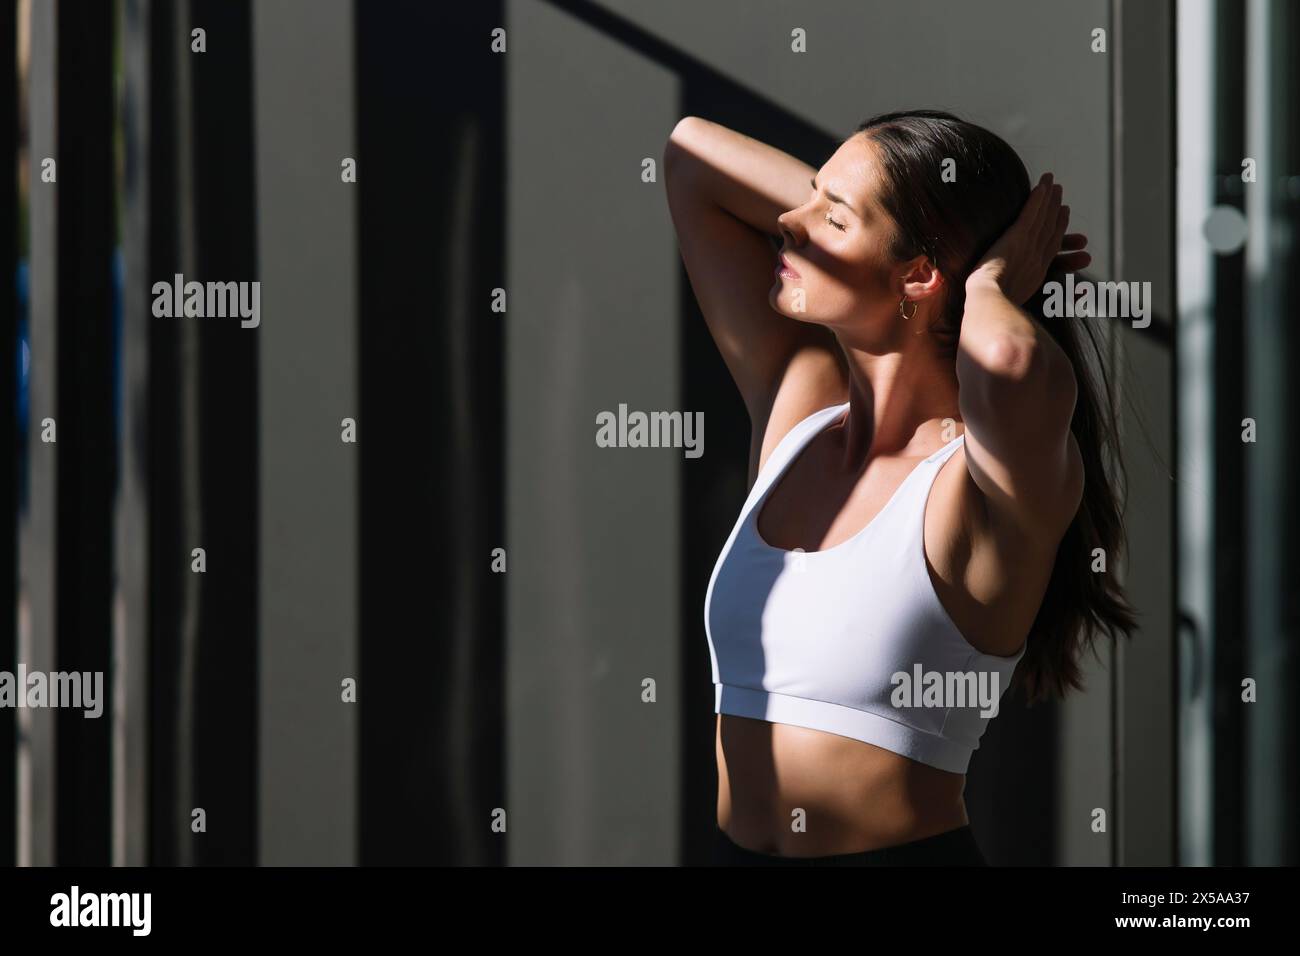 A fit woman in sportswear performs a stretch at home, basking in the sunlight that enhances her peaceful expression Stock Photo